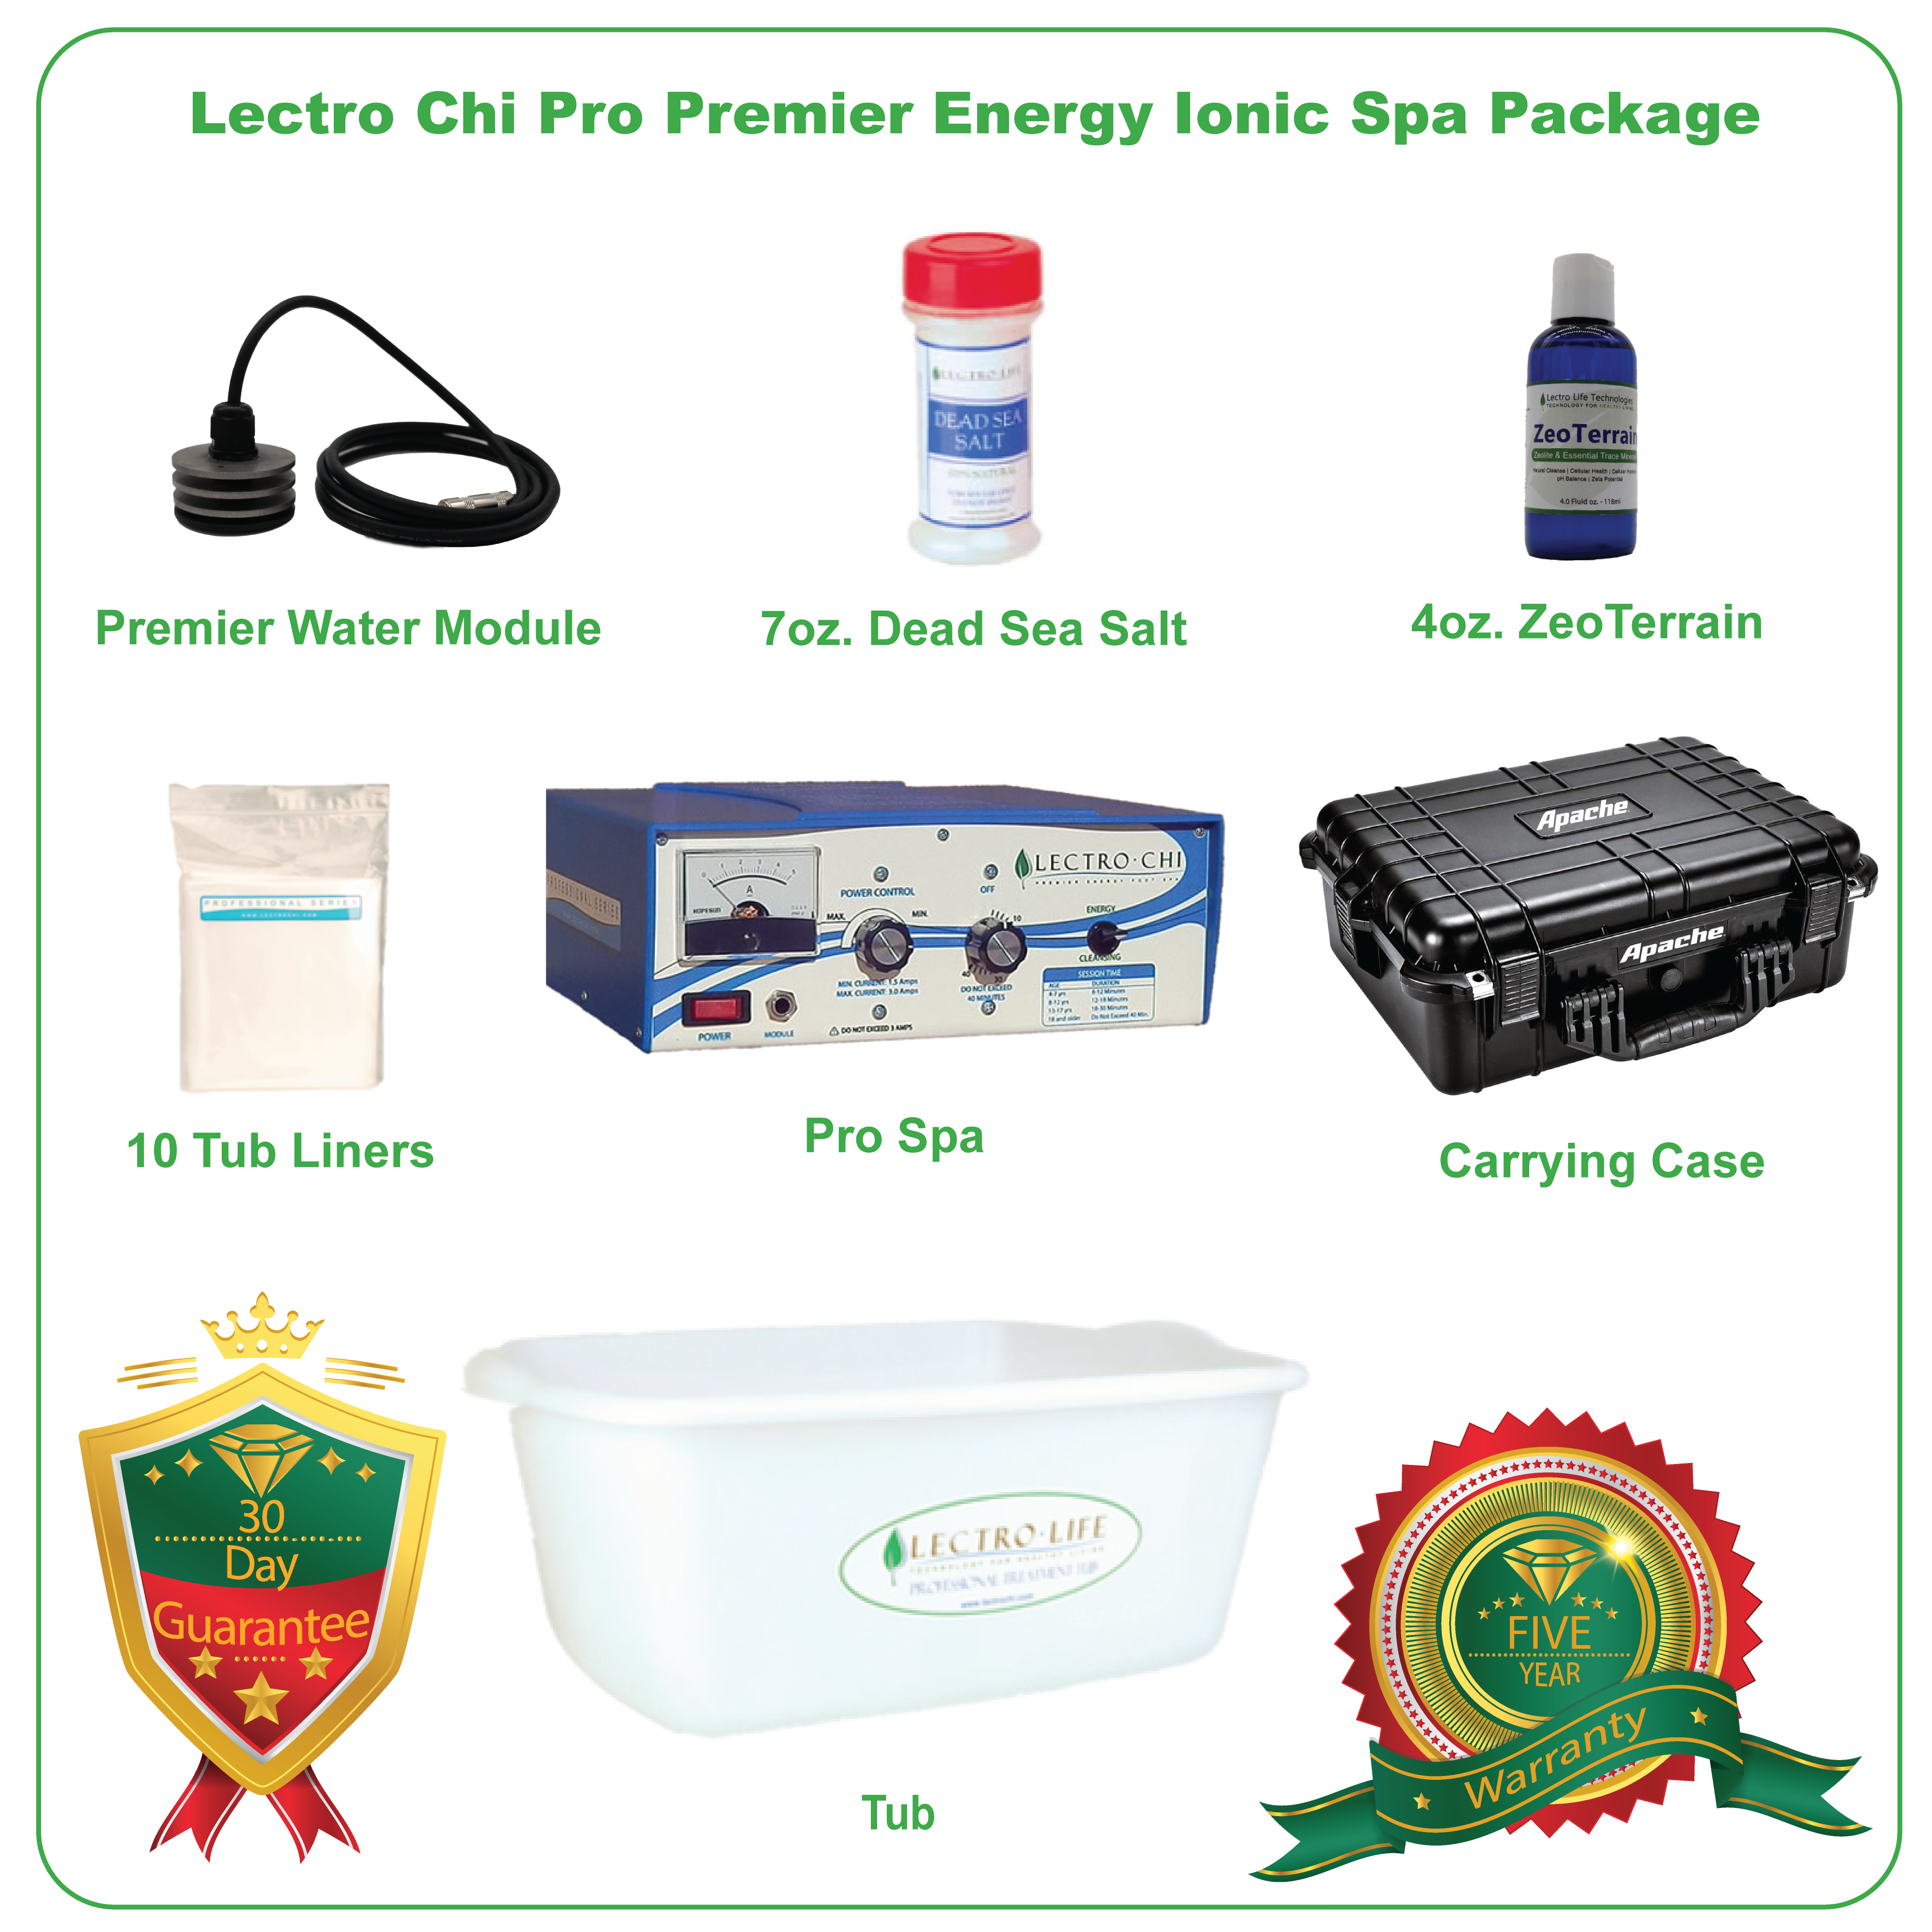 Lectro Chi Pro Premier Energy Ionic Spa Package